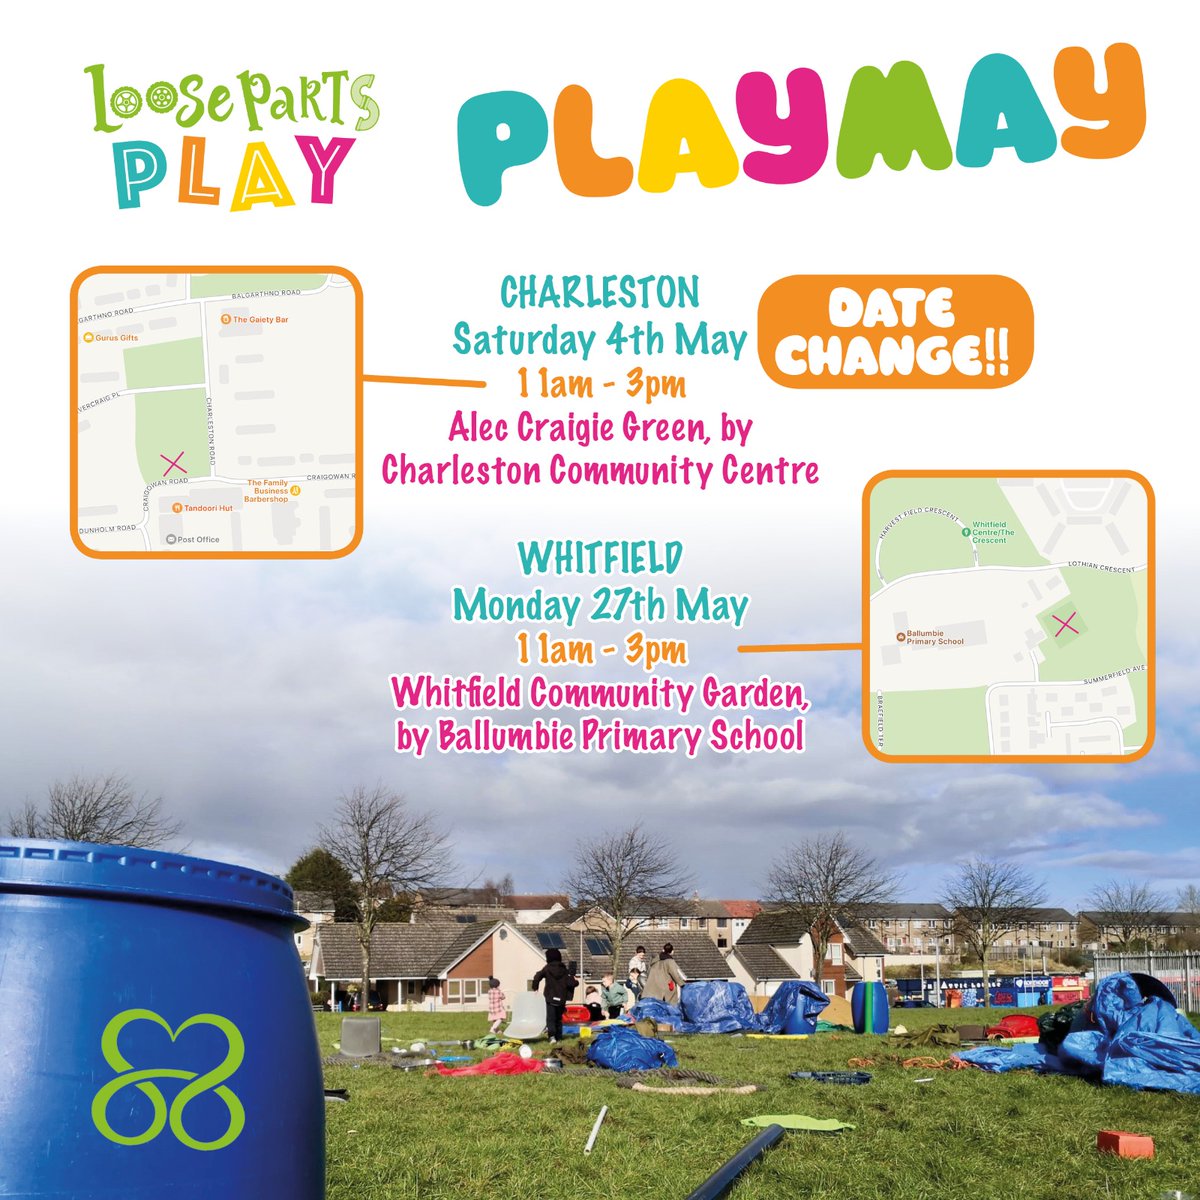 Wanted to give a big thank you to everyone who attend our Looseparts Play session this weekend! Our next session is... Mon 27th 11am -3pm Whitfield @ Whitfield Community Garden by Ballumbie Primary School ❤️Free and all welcome! ❤️ #loosepartsplay #playistheway #scrapantics